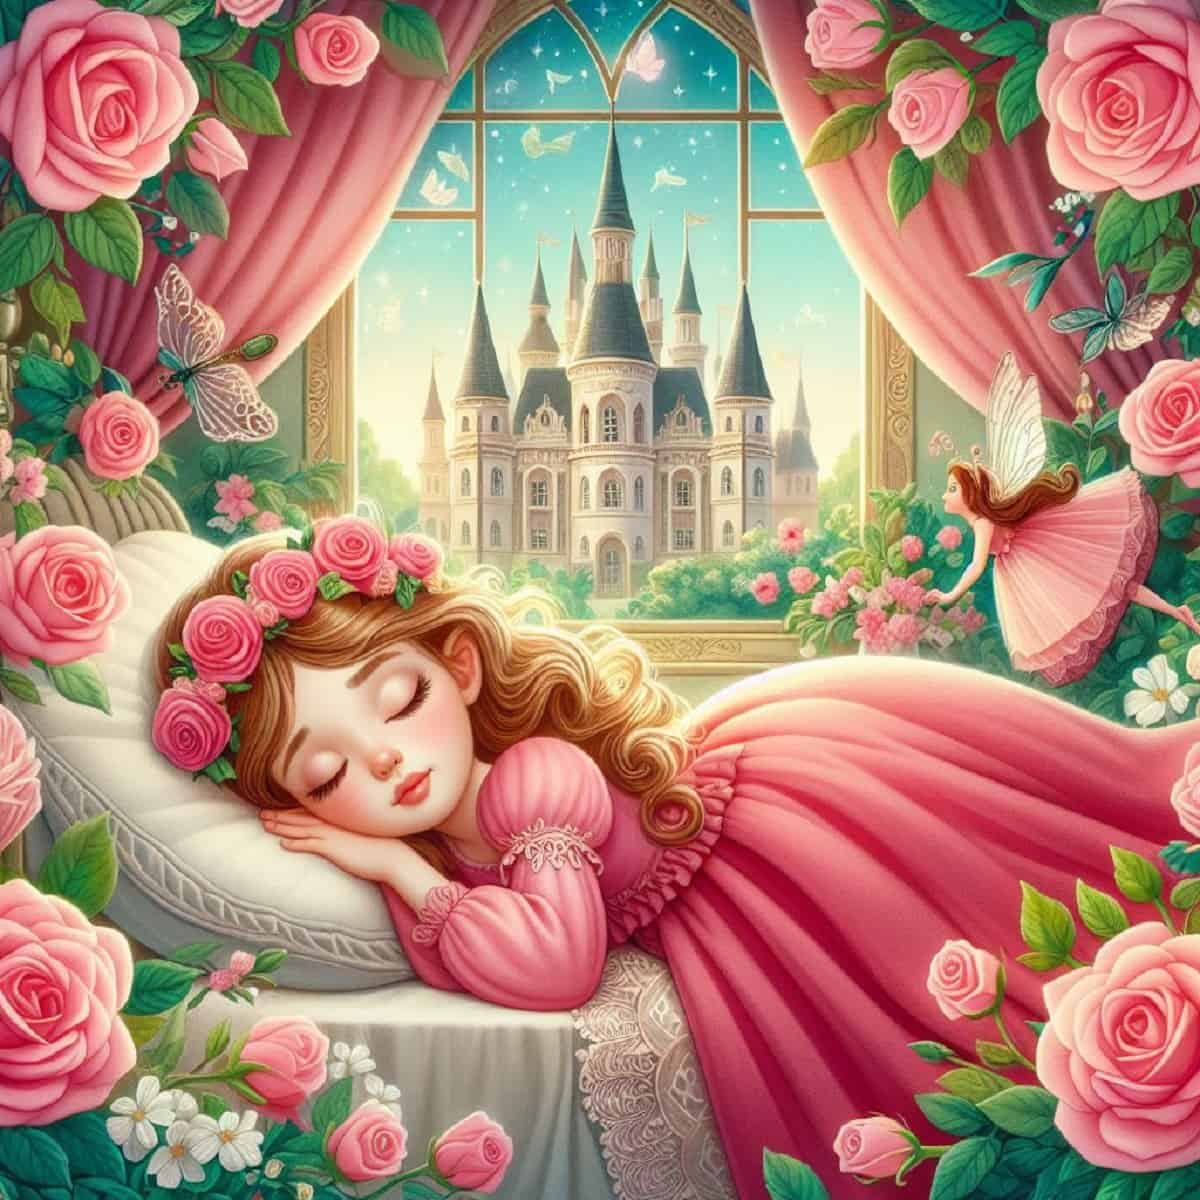 The tale of the sleeping beauty